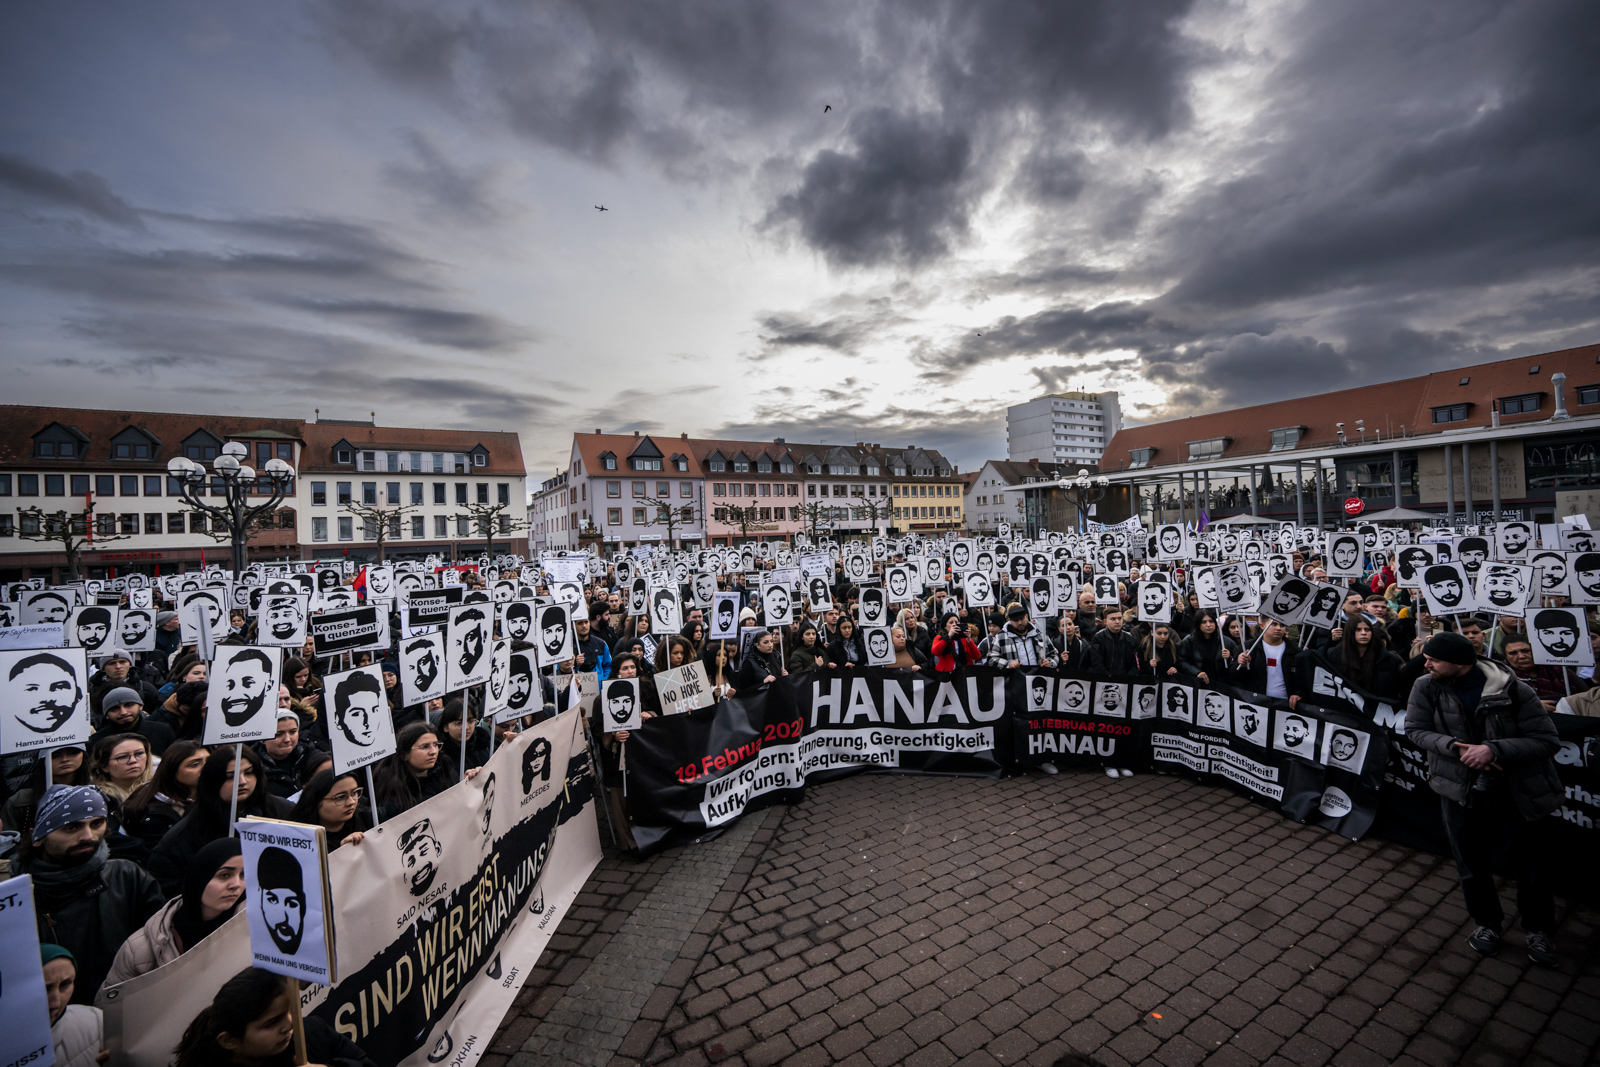 19 February 2023 demonstration in Hanau, Germany, marking the 3rd anniversary of the 2020 mass shooting in the city by Tobias Rathjen